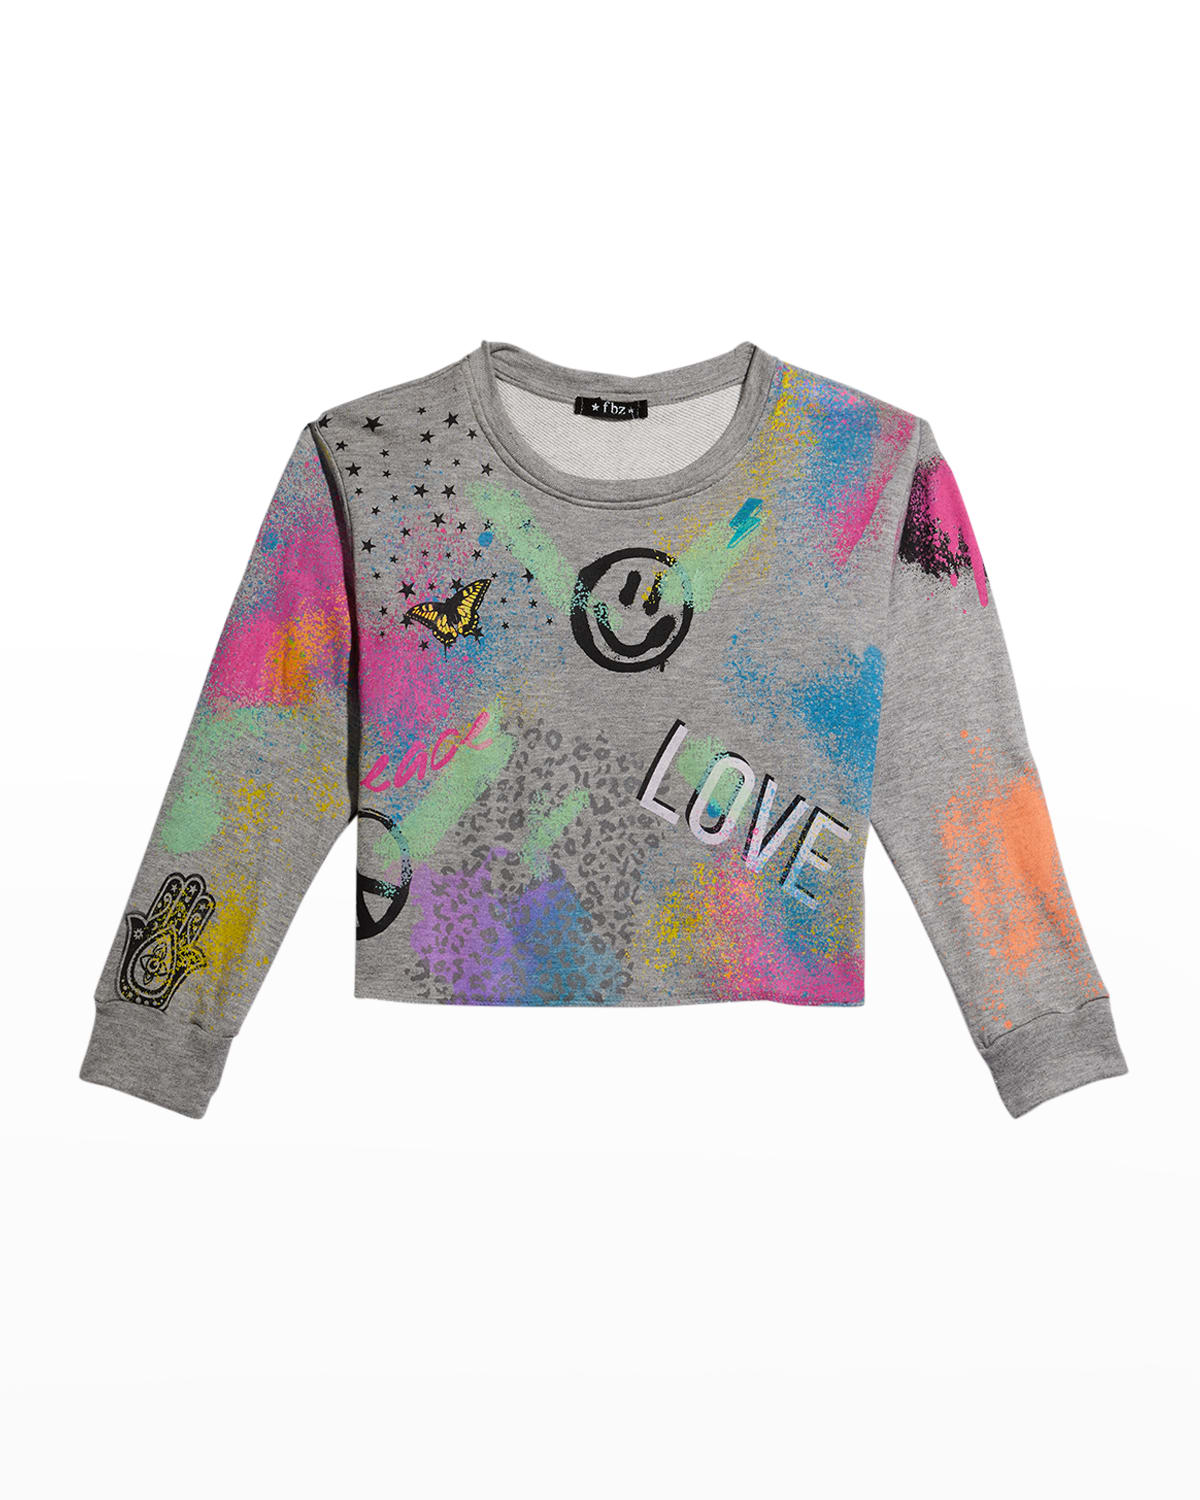 Girl's Airbrush Graphic Sweater, Size 4-6